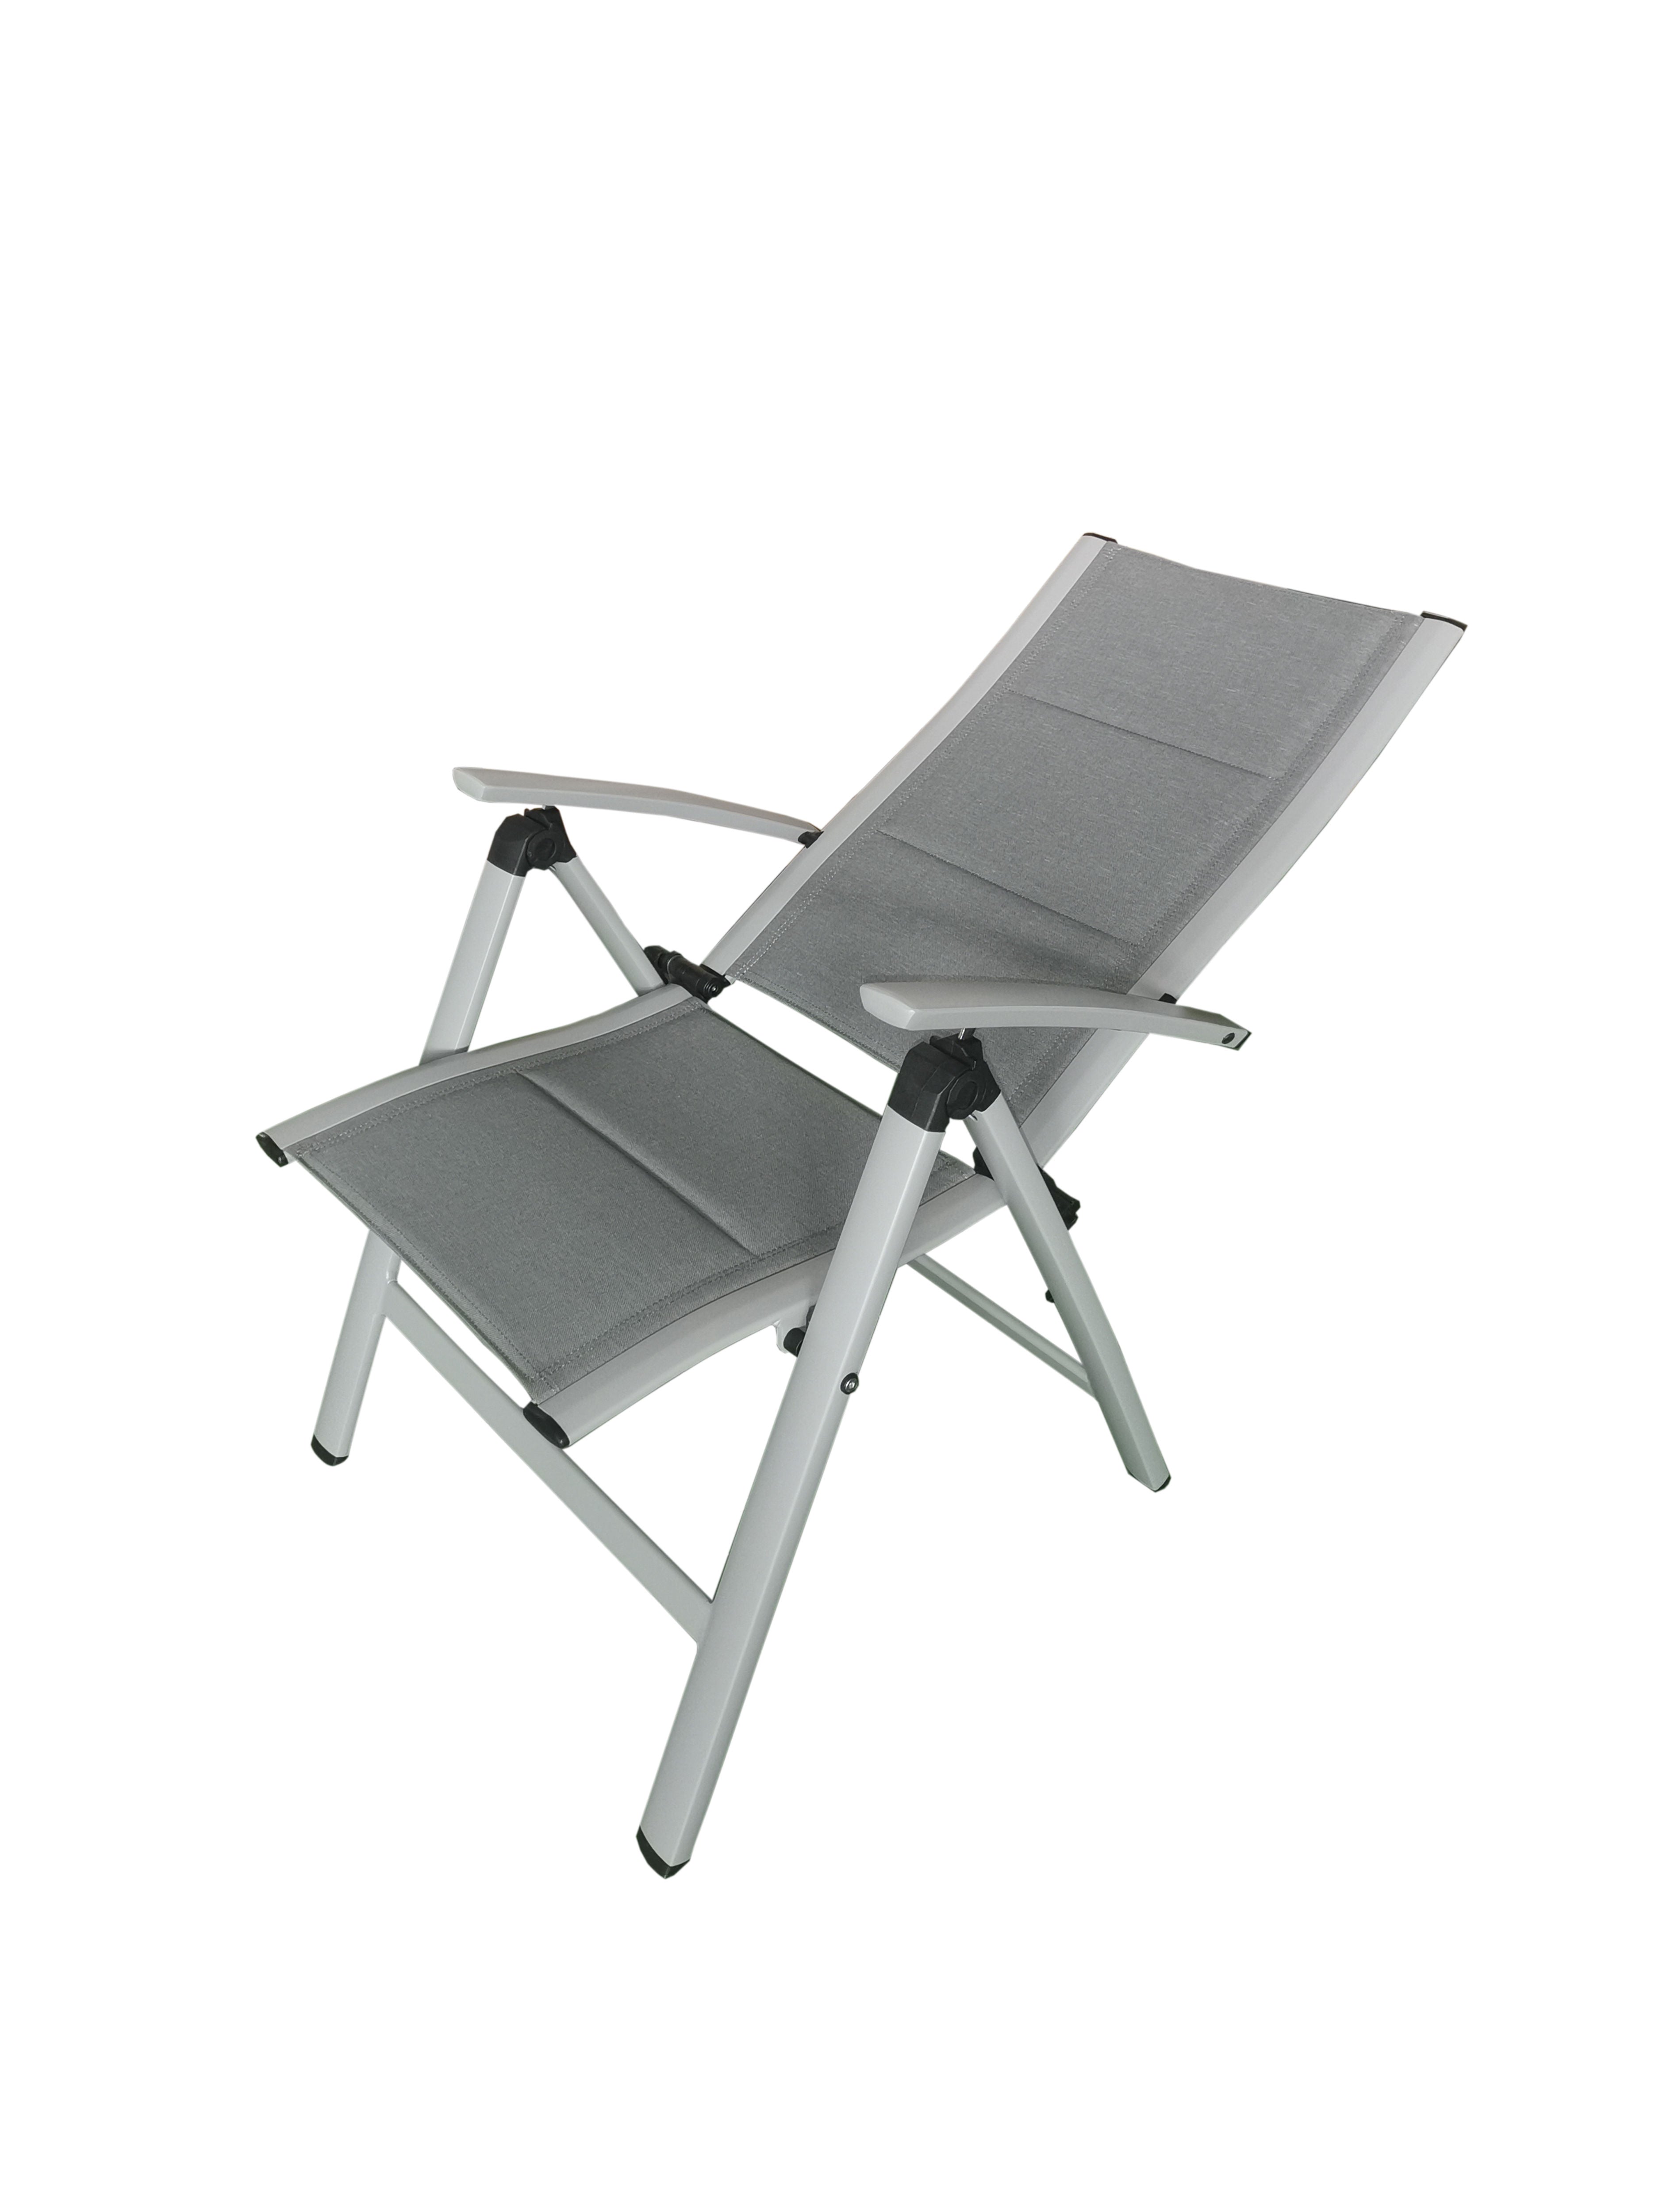 PatioZone Reclining Armchair with Quick-Dry Textilene and Aluminum Frame (MOSS-0438GPM) - Light Grey / Grey